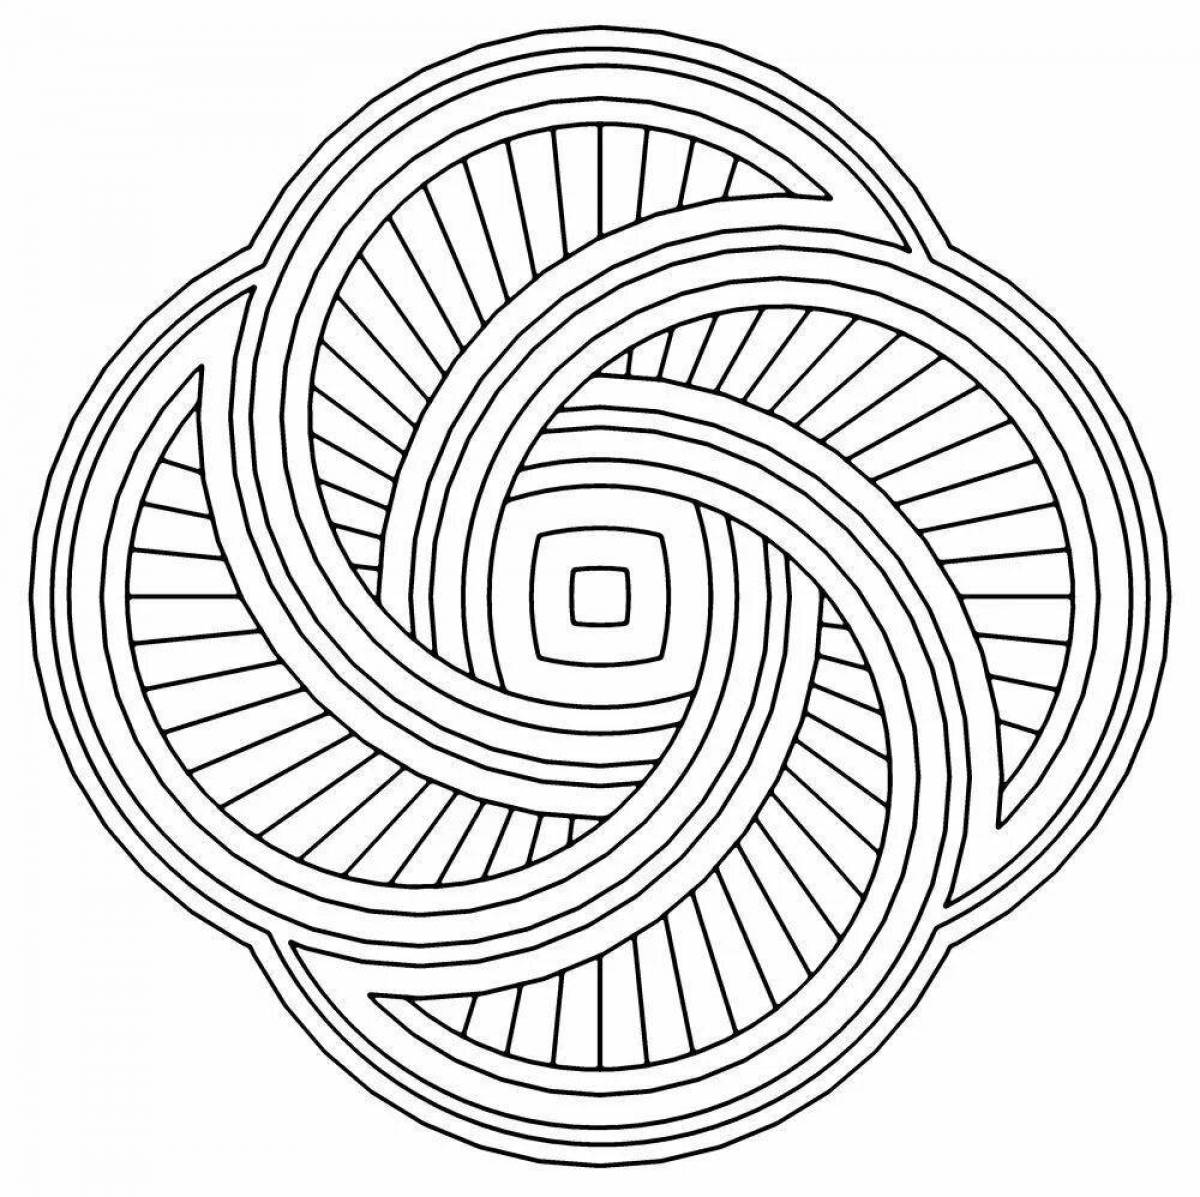 Tempting spiral create coloring page